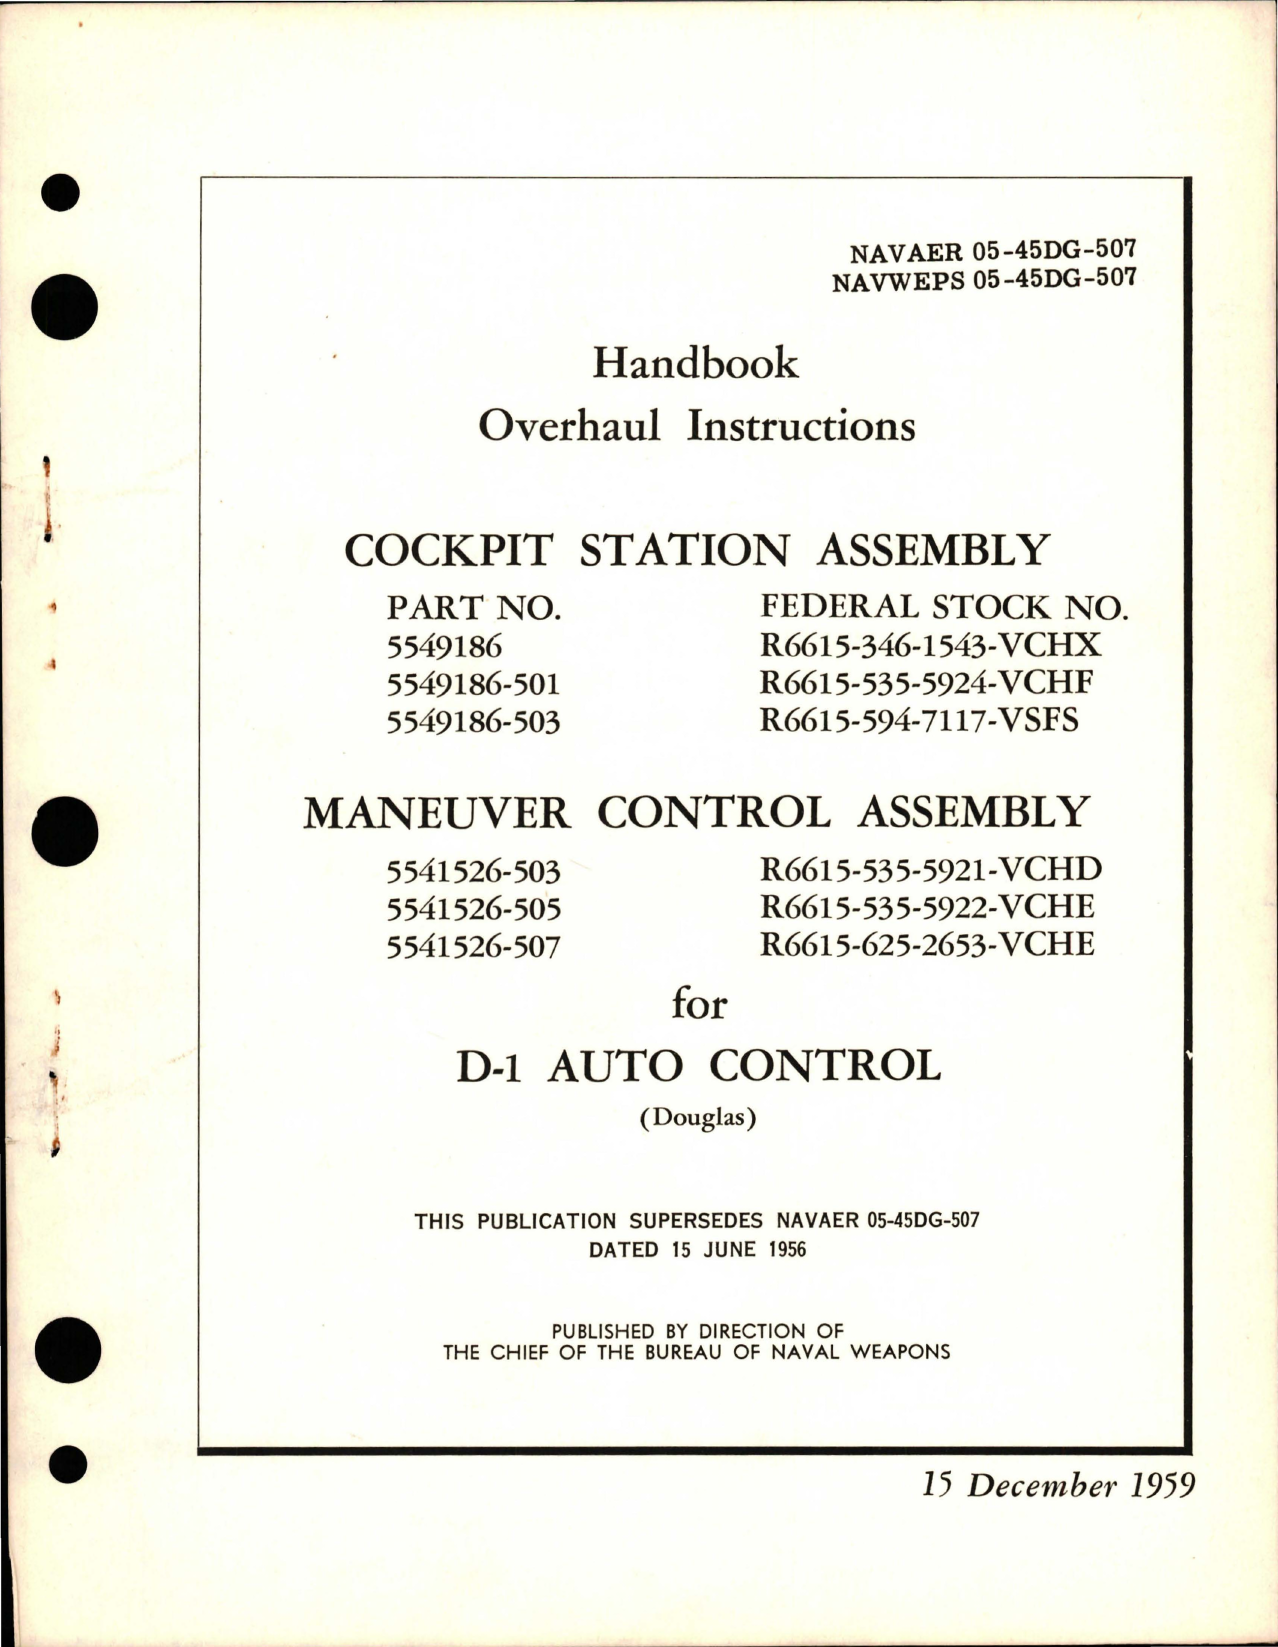 Sample page 1 from AirCorps Library document: Overhaul Instructions for Cockpit Station Assembly, Maneuver Control Assembly for D-1 Auto Control